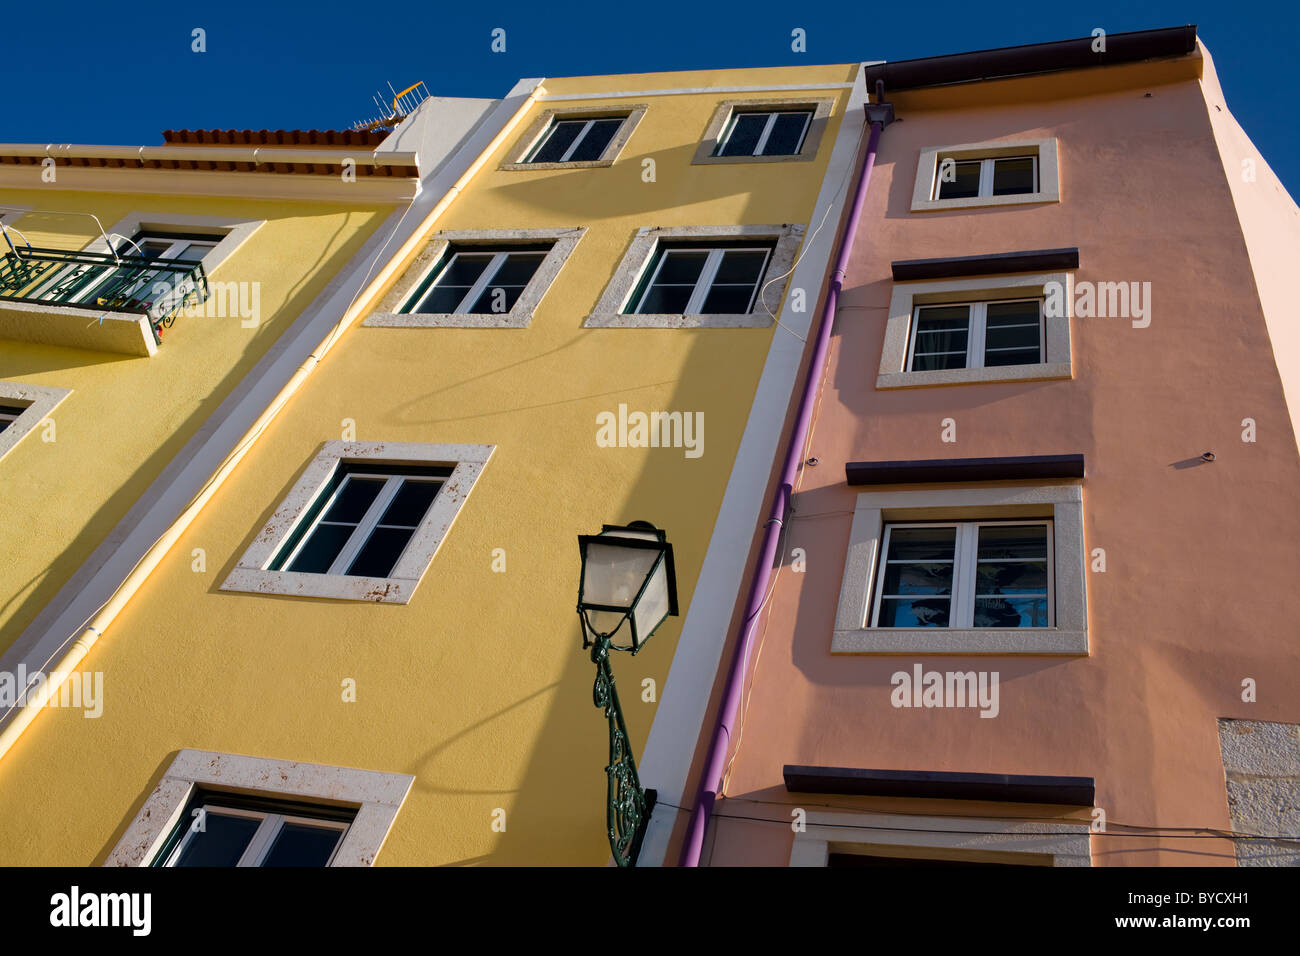 Colorful houses in Alfama district, Lisbon, Portugal Stock Photo